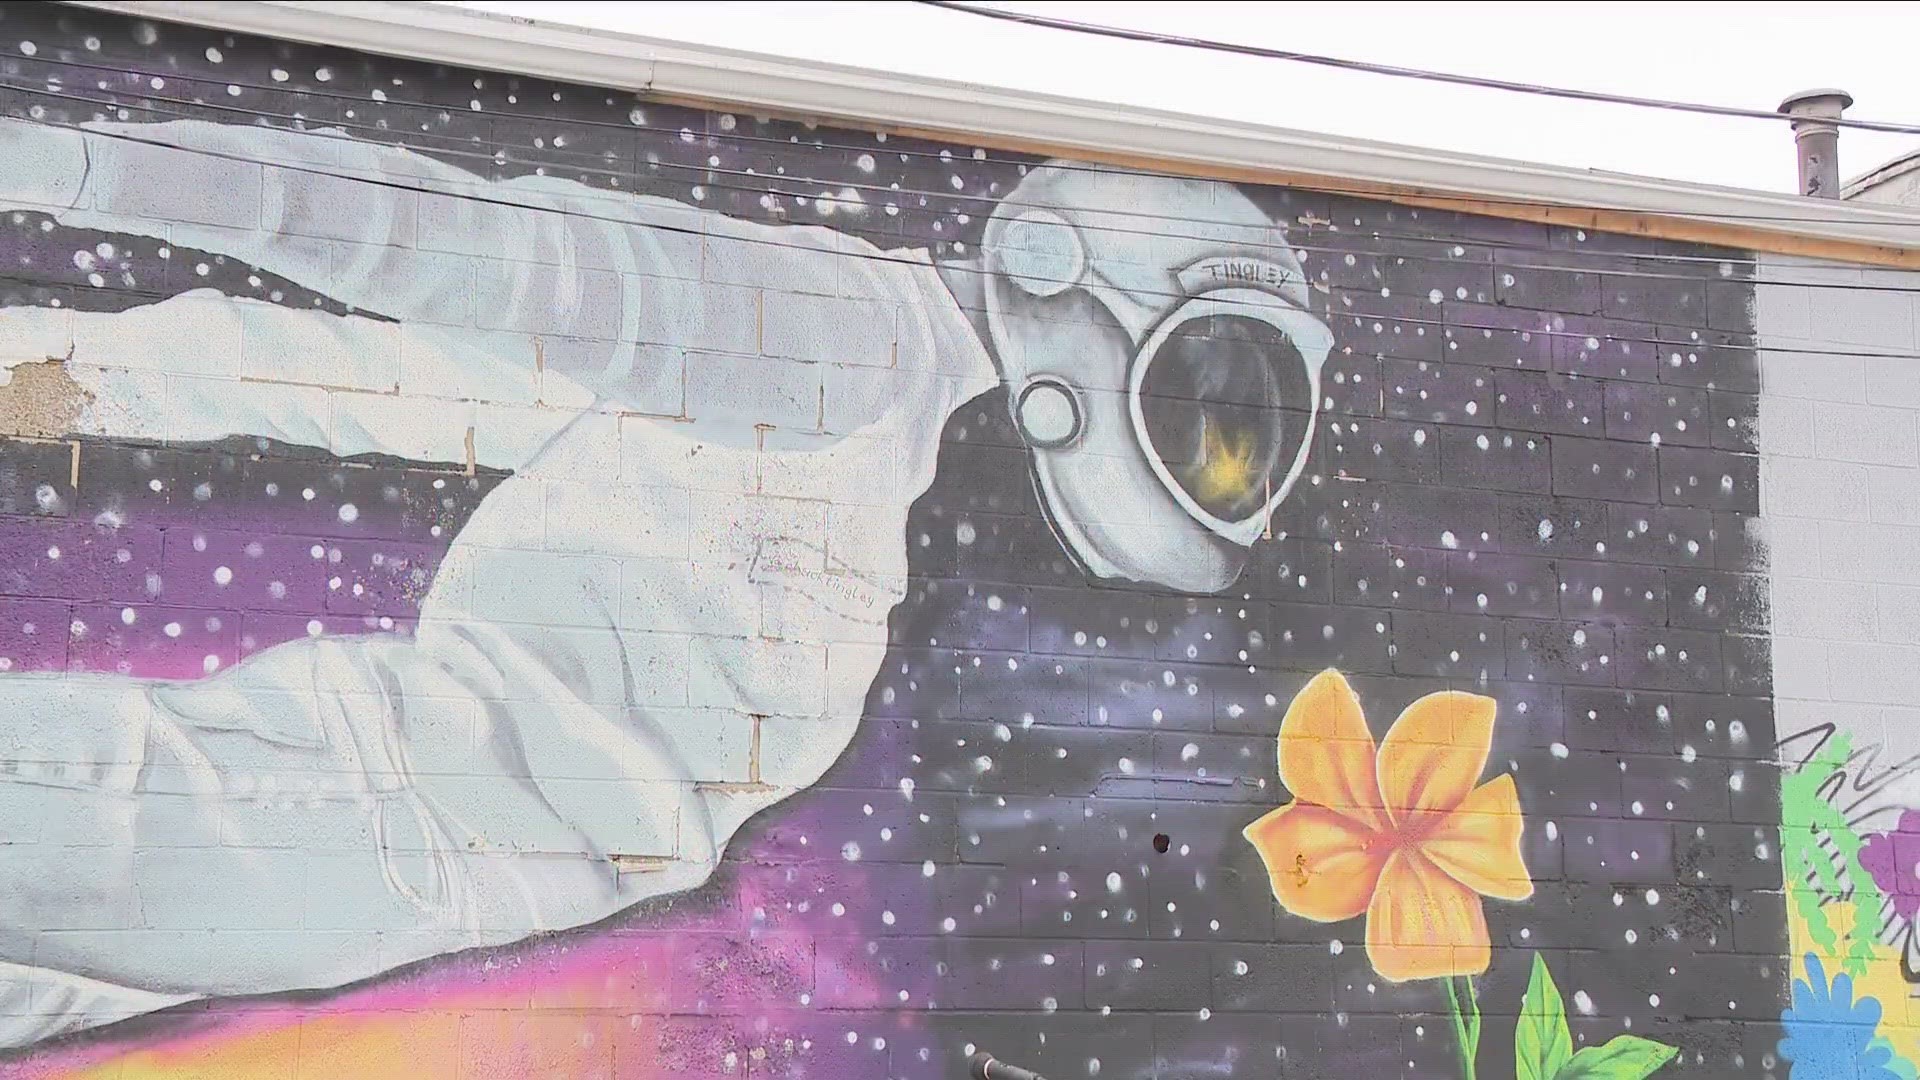 25 Artists were chosen from a pool of about 100 applicants. Mural Fest runs June 10 and 11th.